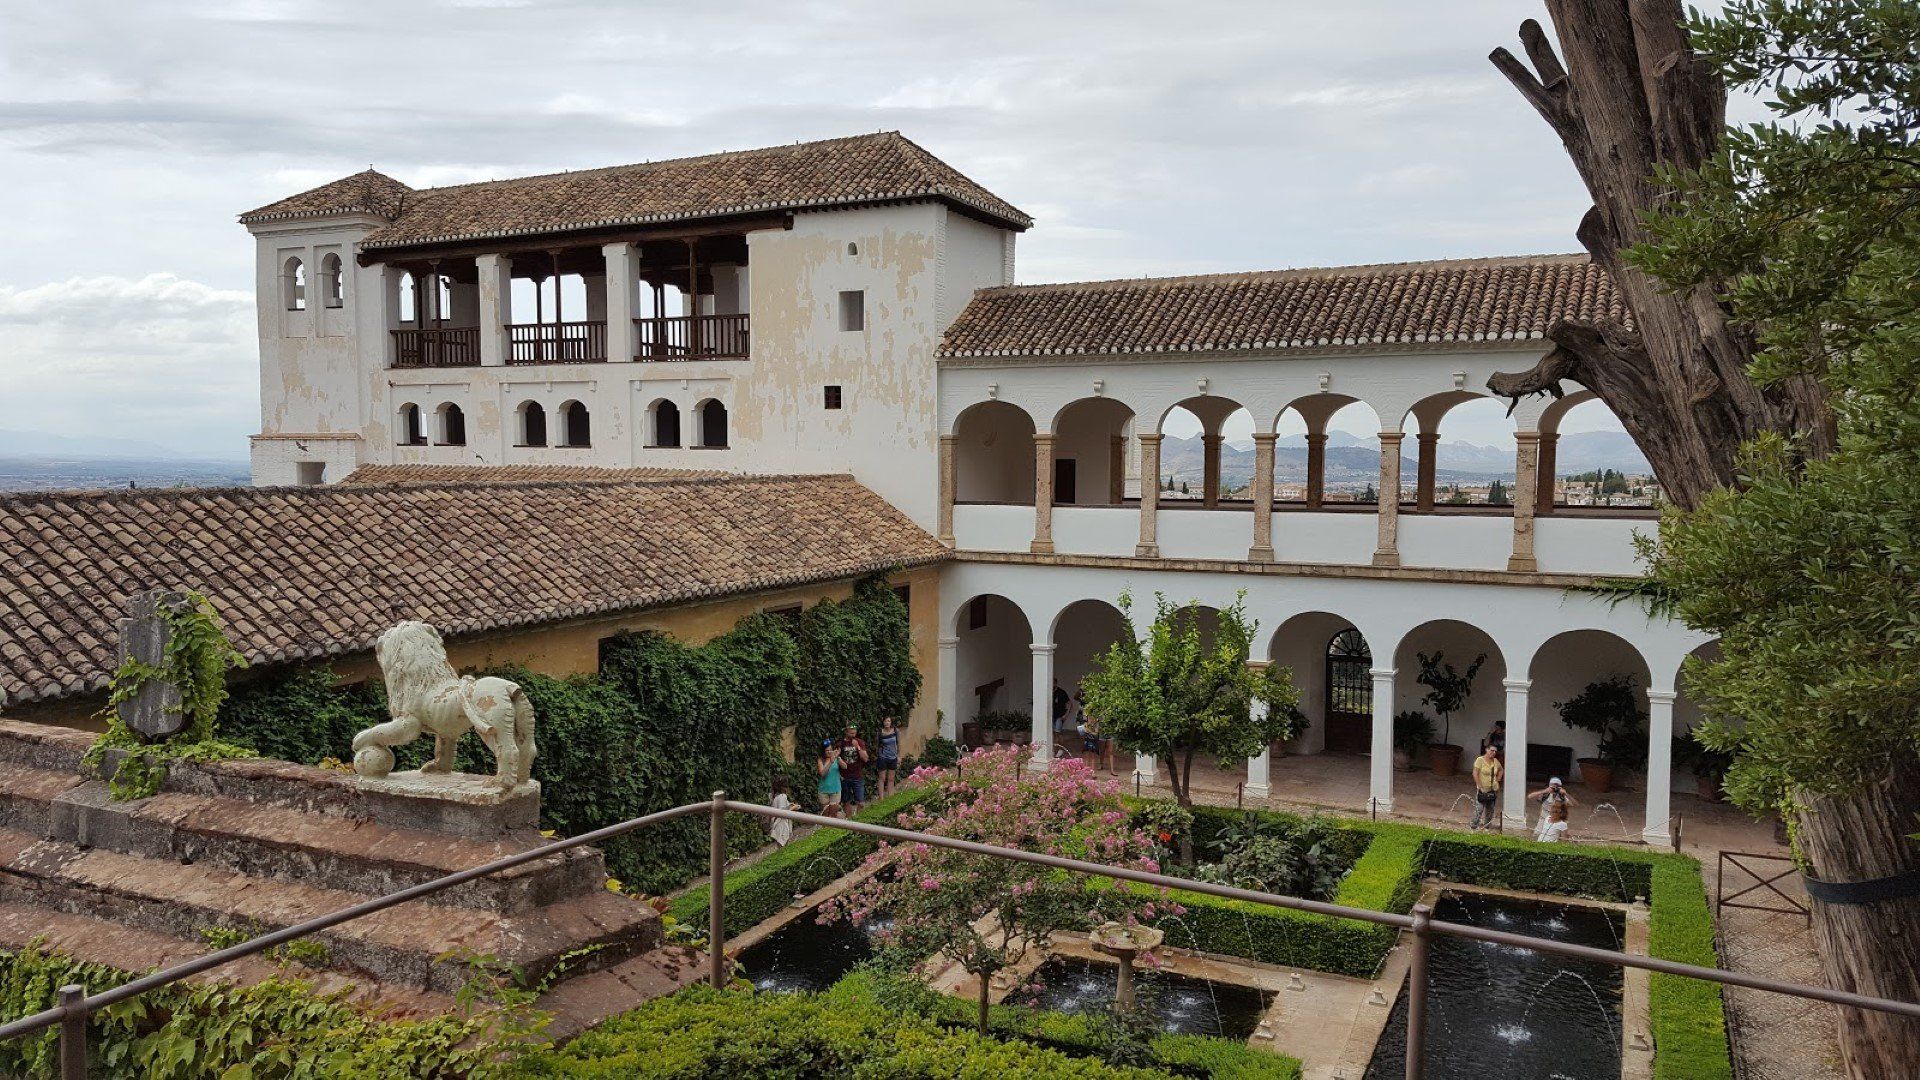 The ancient gardens and fortress of Alhambra